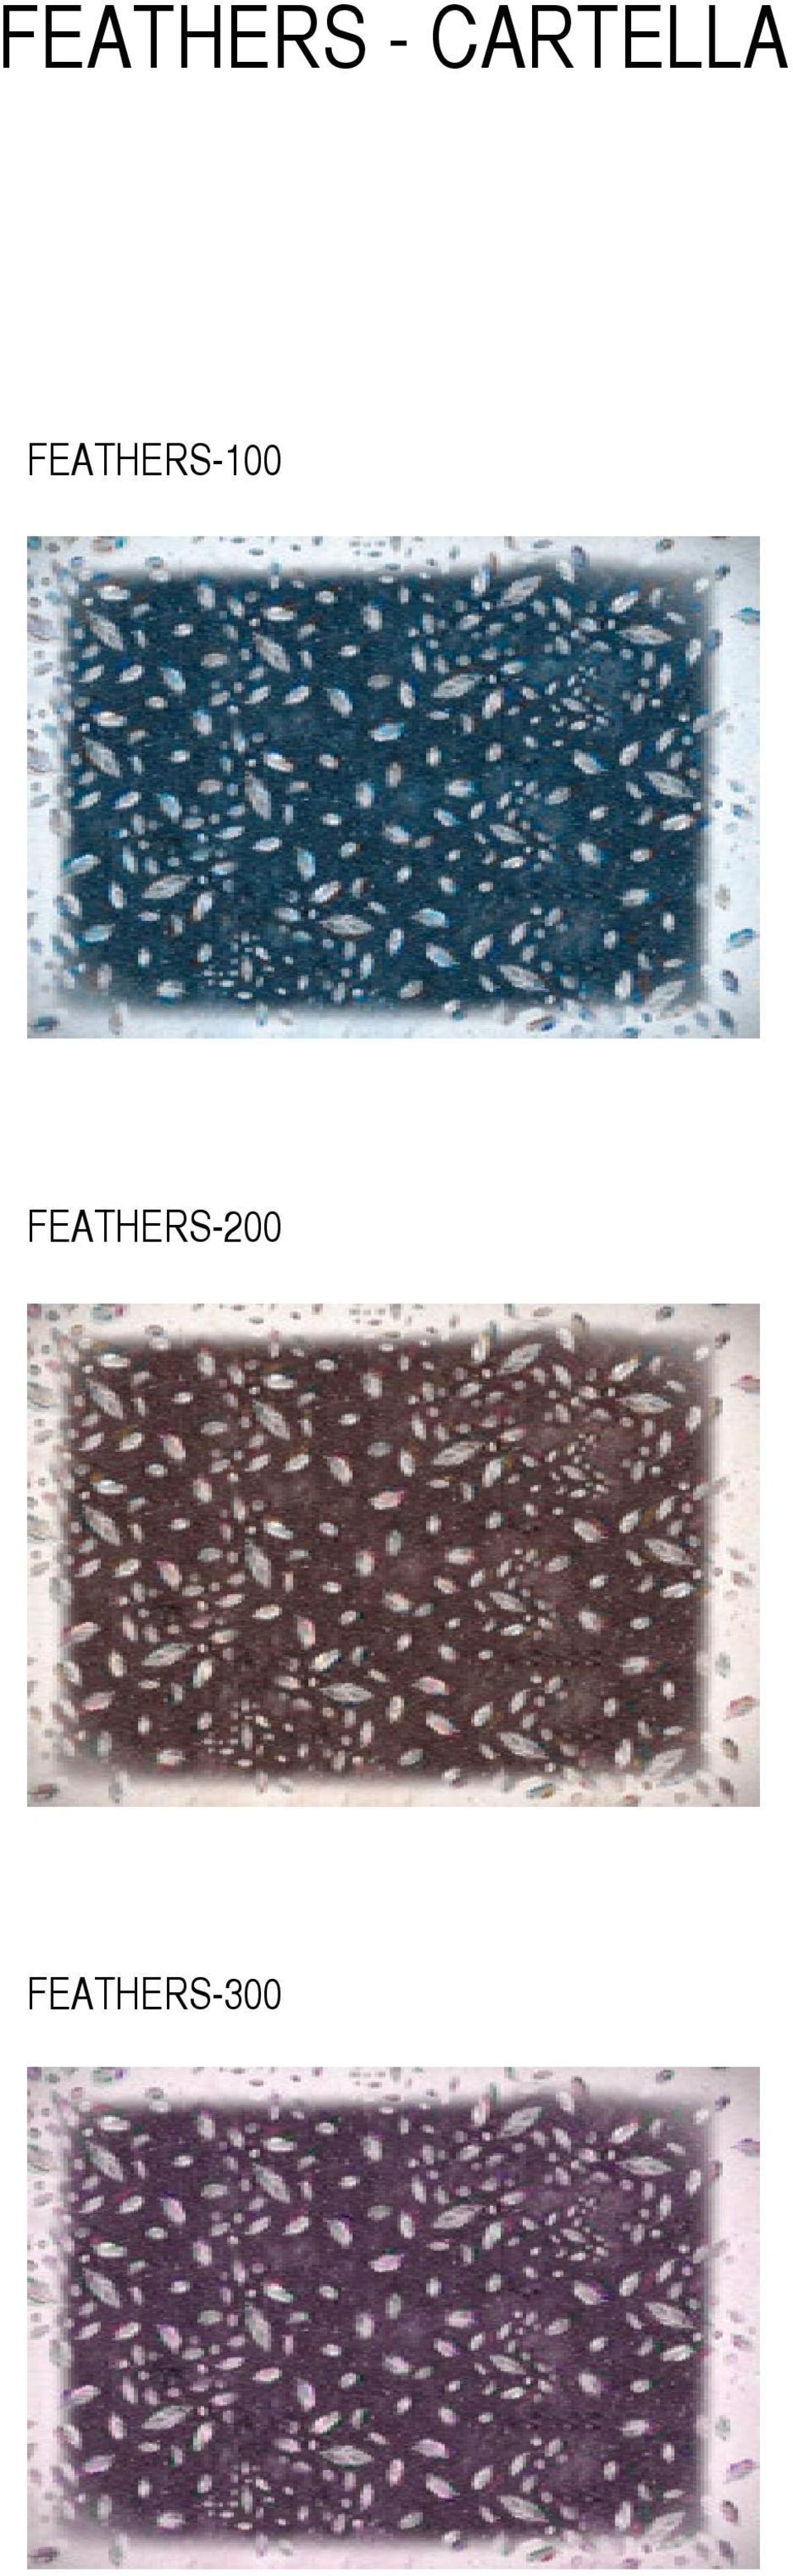 FEATHERS-100